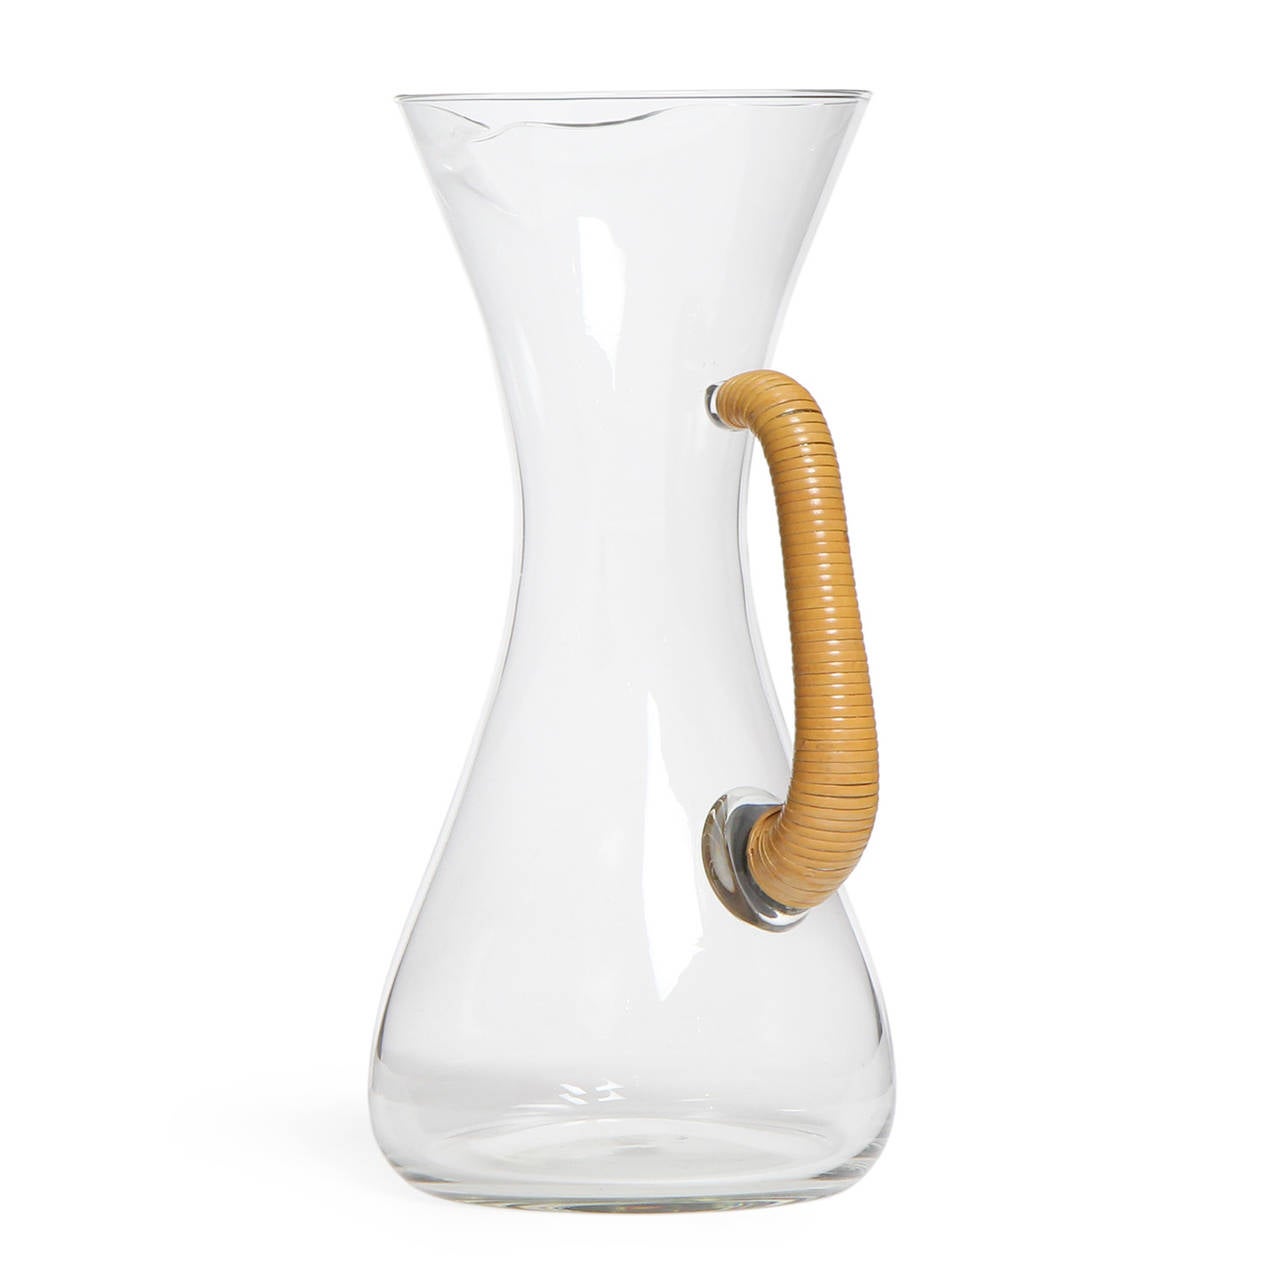 A finely crafted blown glass pitcher having organic rounded lines and beautiful cane wrapped handle.